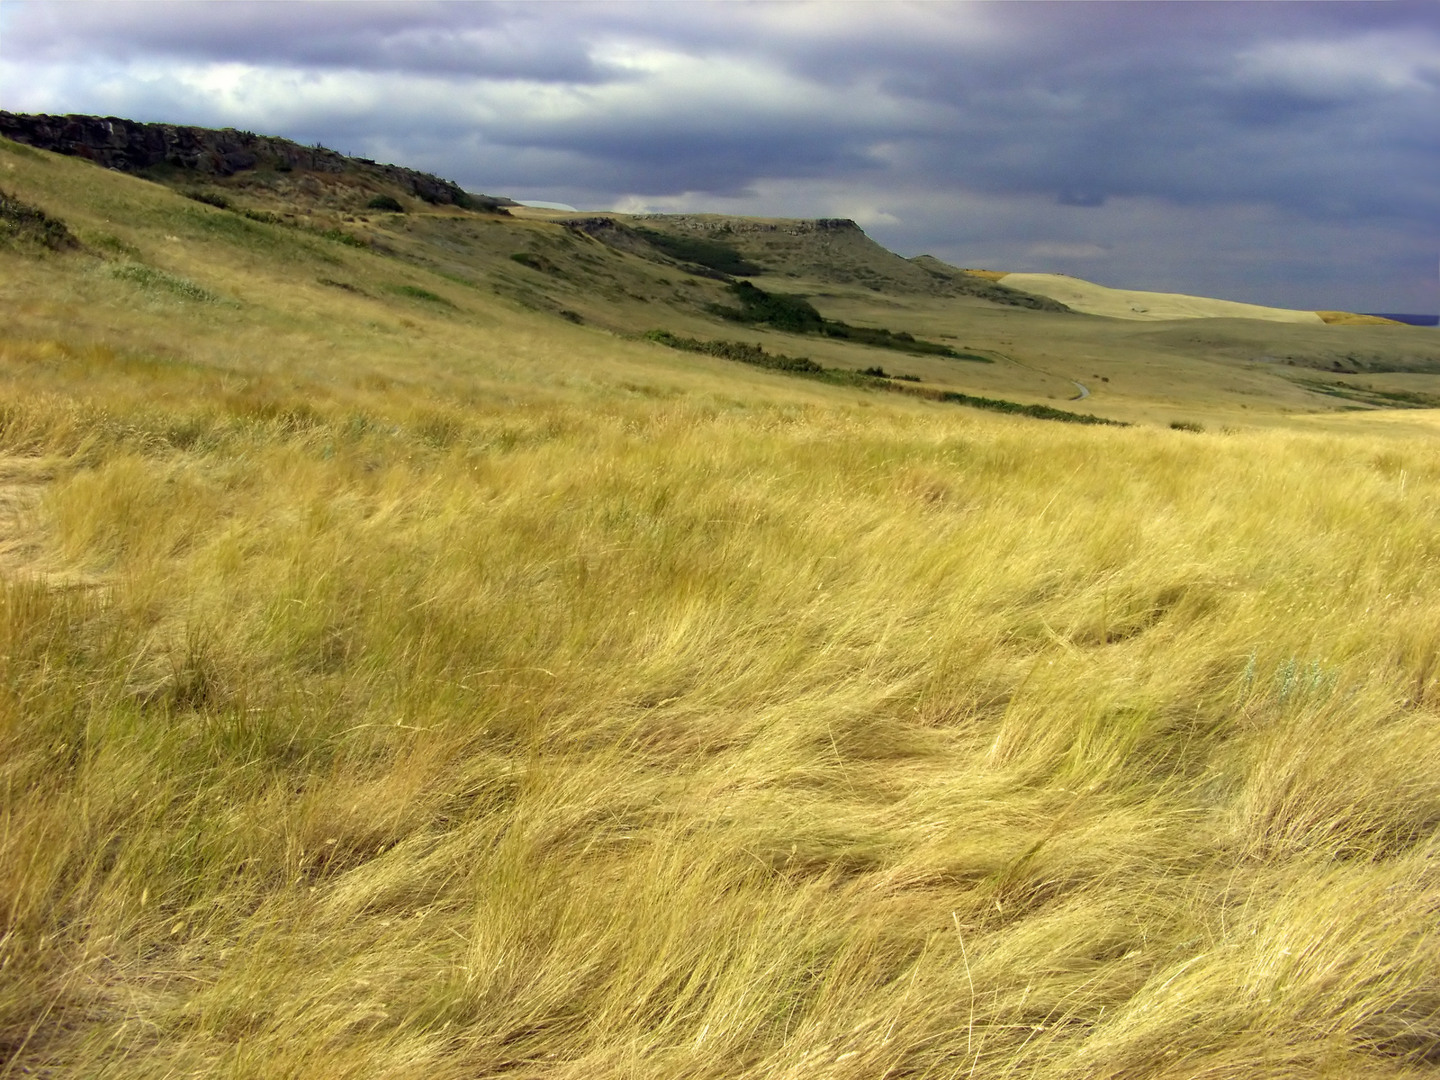 What are examples of temperate grassland vegetation?